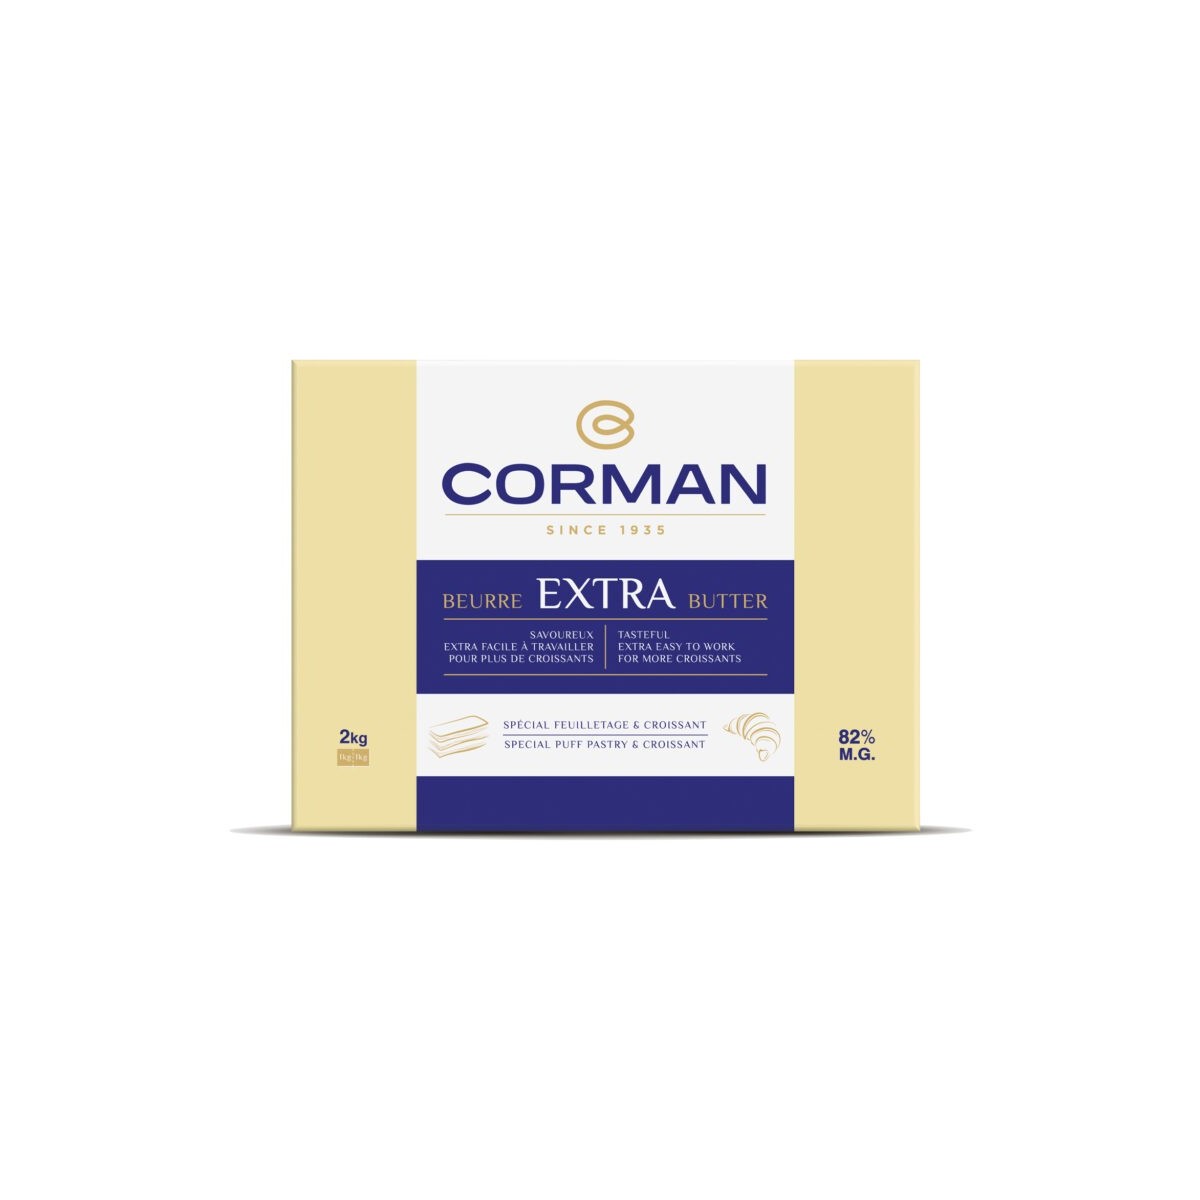 CORMAN BUTTER EXTRA 82% PUFF PASTRY & CROISSANT NEUTRAL 5 X 2KG 0029125 - 29777501  KG